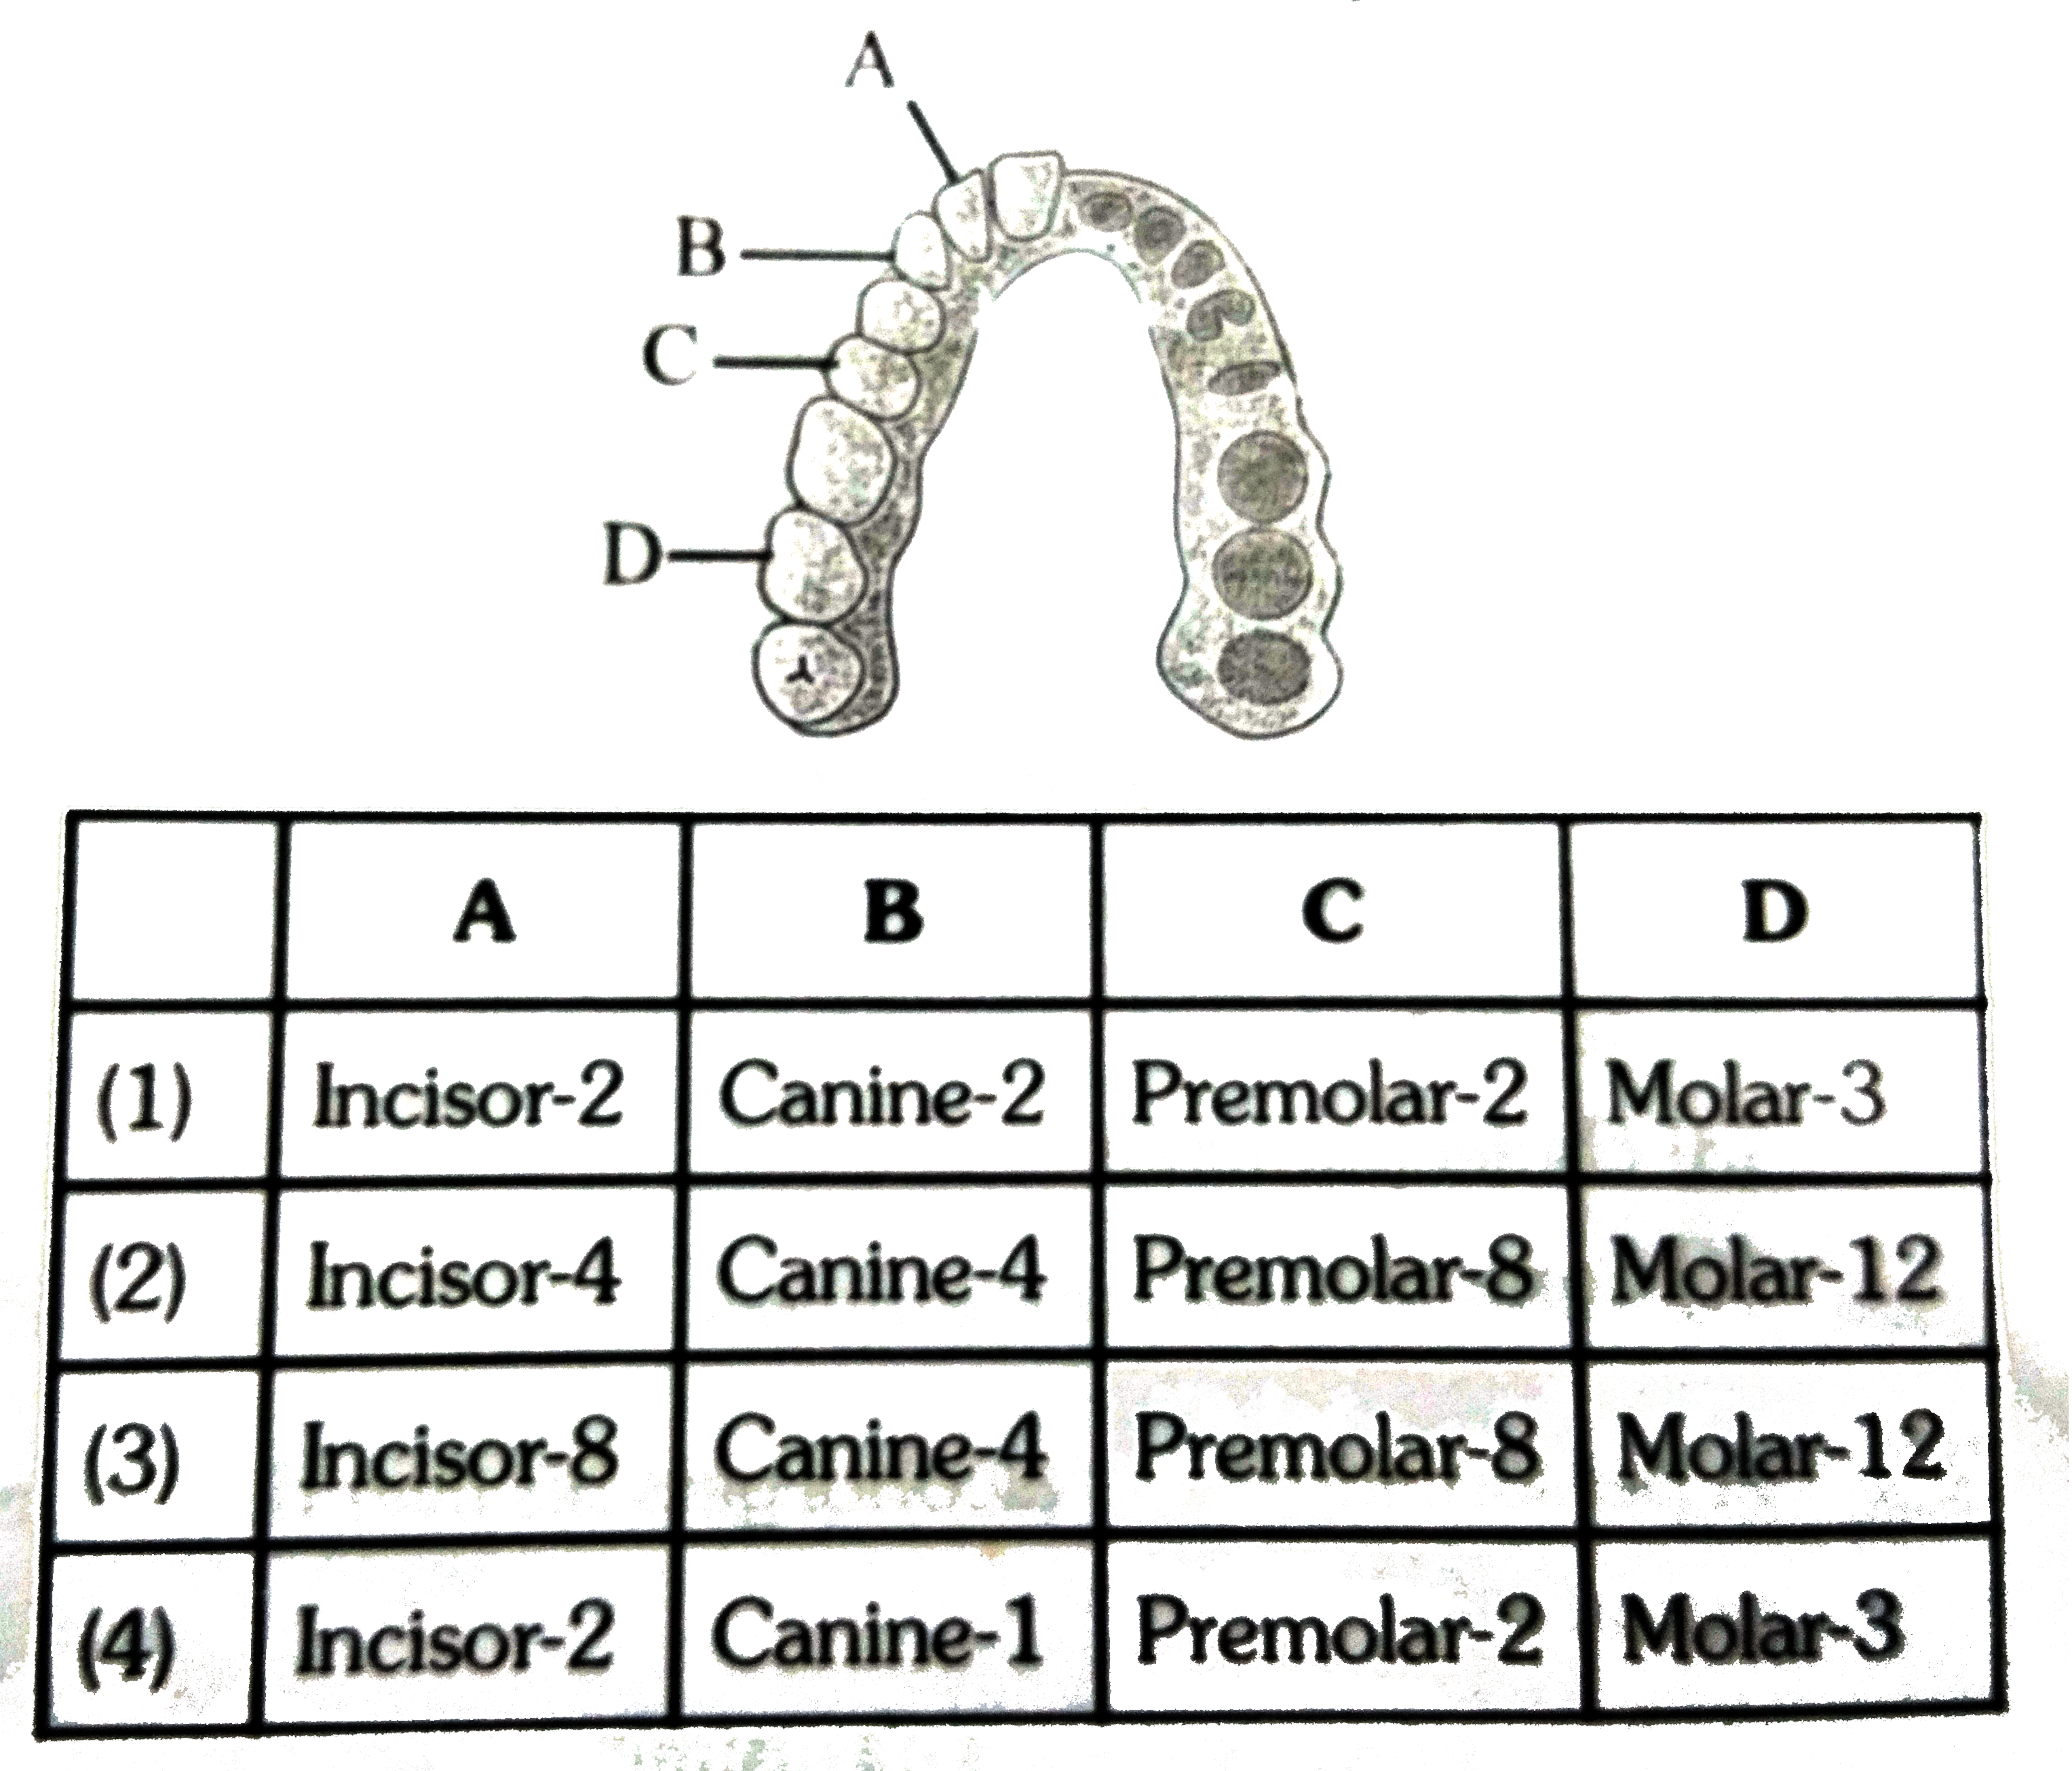 Identify A,B,C and D and choose correct option regardin their nmber in complete jaw :-